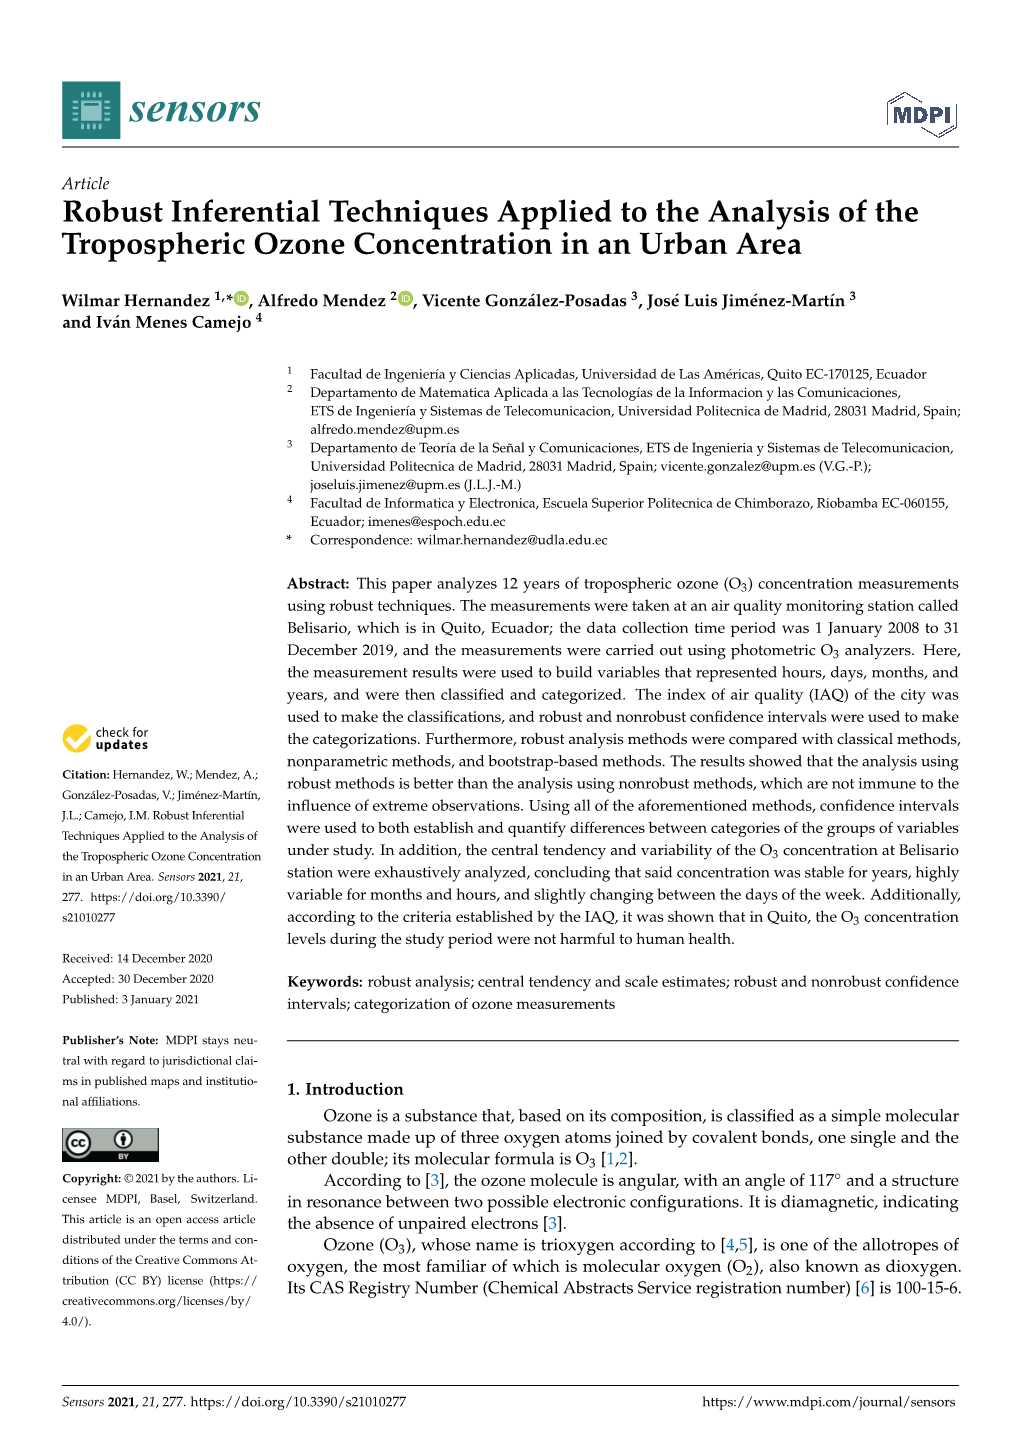 Robust Inferential Techniques Applied to the Analysis of the Tropospheric Ozone Concentration in an Urban Area